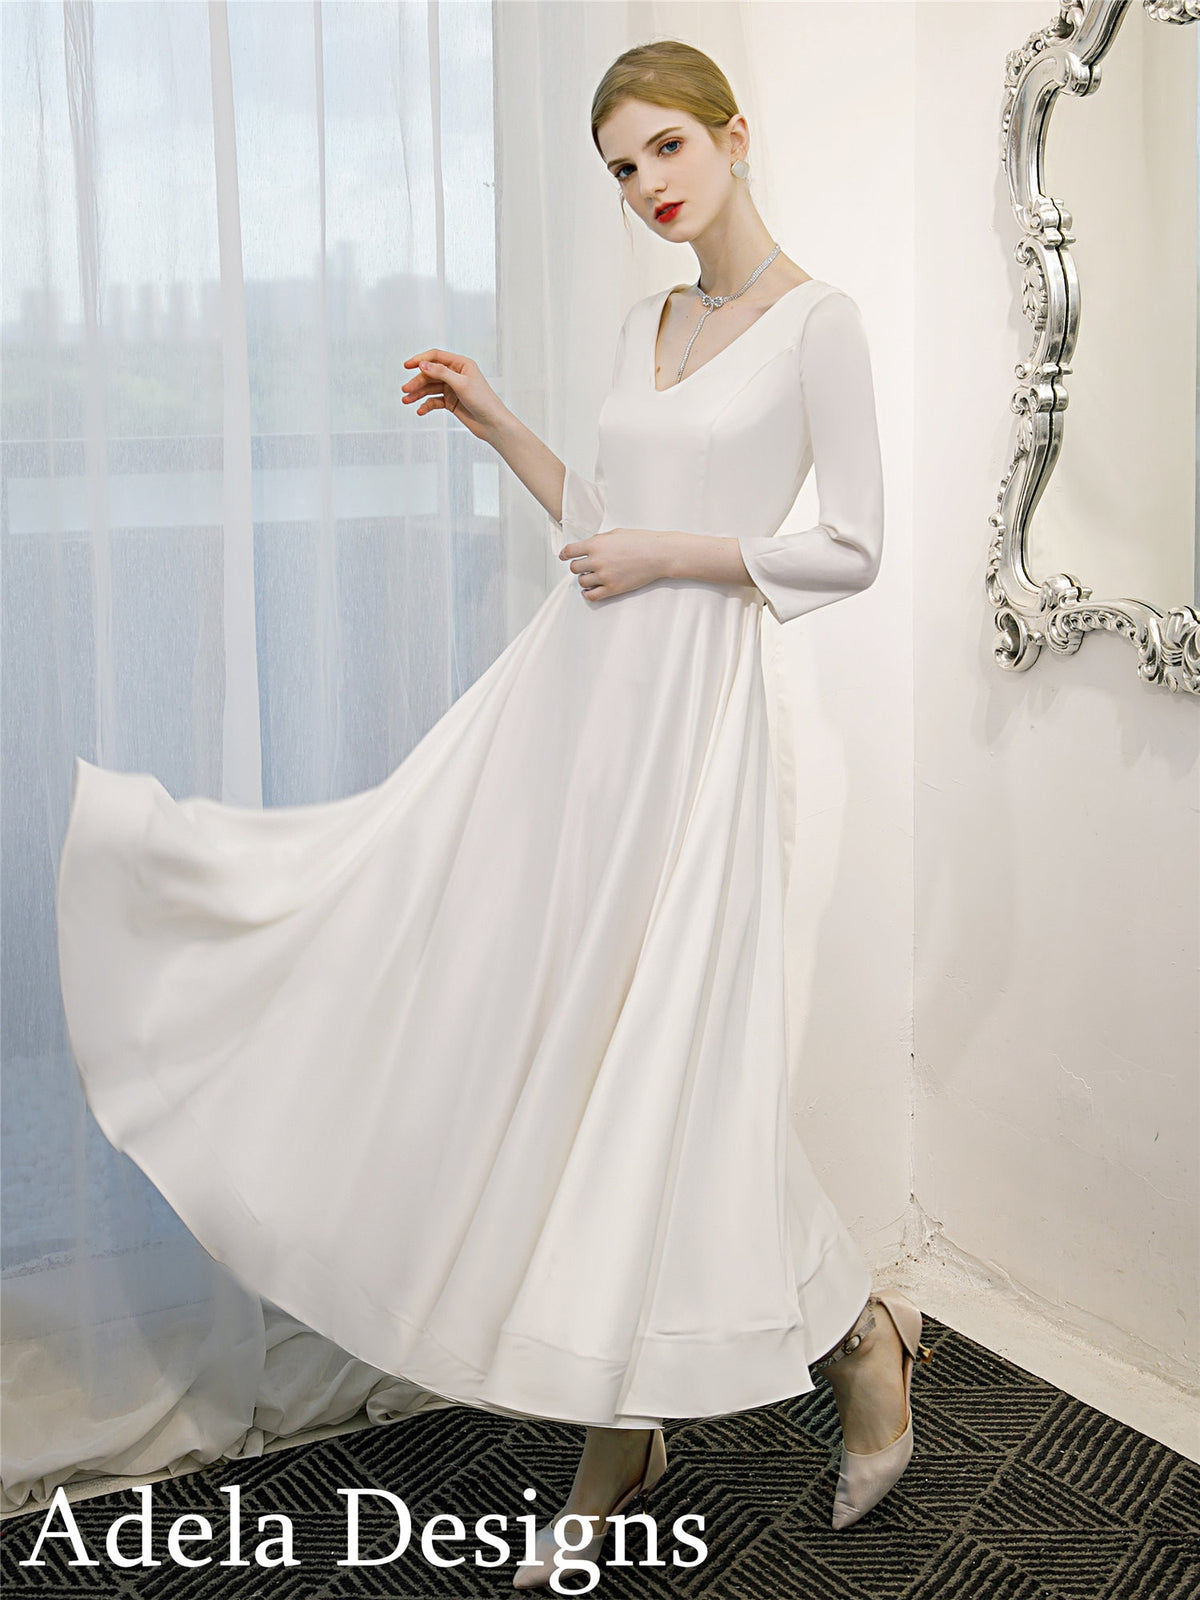 Simple Soft Satin Tea Length Wedding Dress Bridal Gown 3/4 Sleeves Short Dress Ivory Off White Color Sample Quick Ship Size 4 Pockets